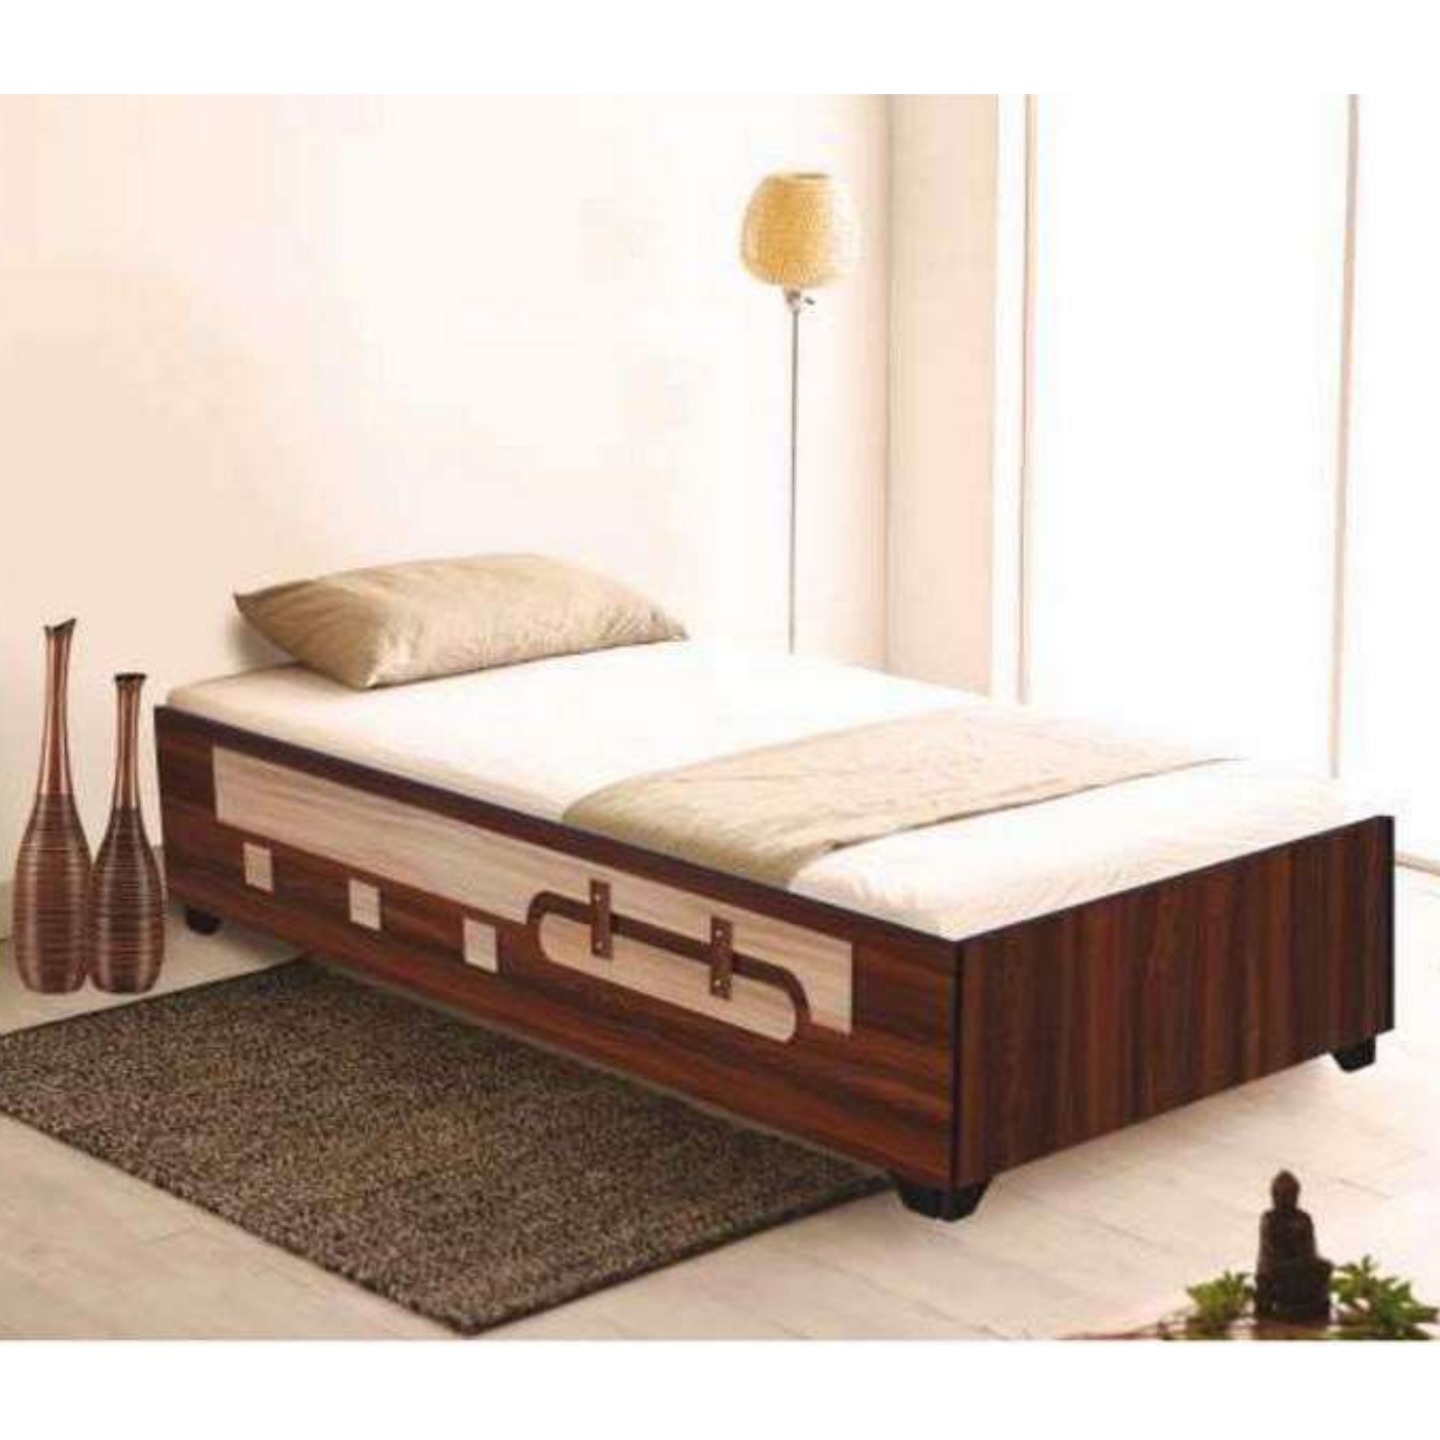 HS Single Bed Size 72"x36" Centra In Brown Colour